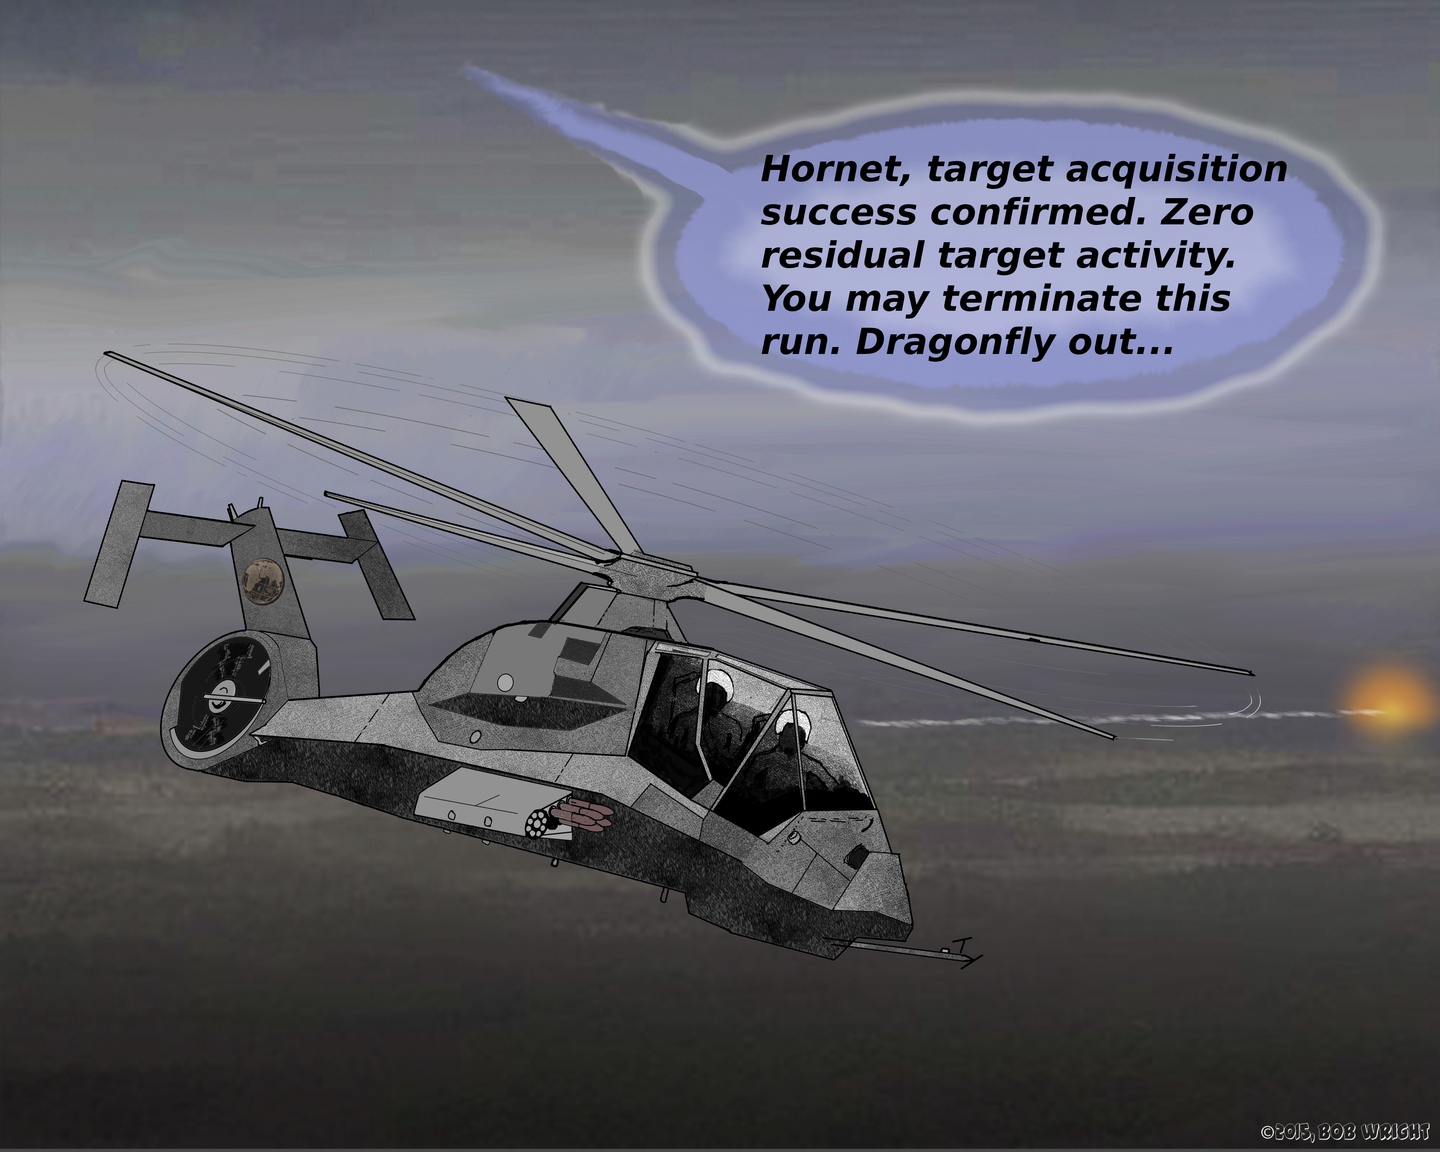 Hornet with bright flash on distant terrain, radio text from off screen, "Hornet, target acquisition success confirmed. Zero residual target activity. You may terminate this run. Dragonfly out..."